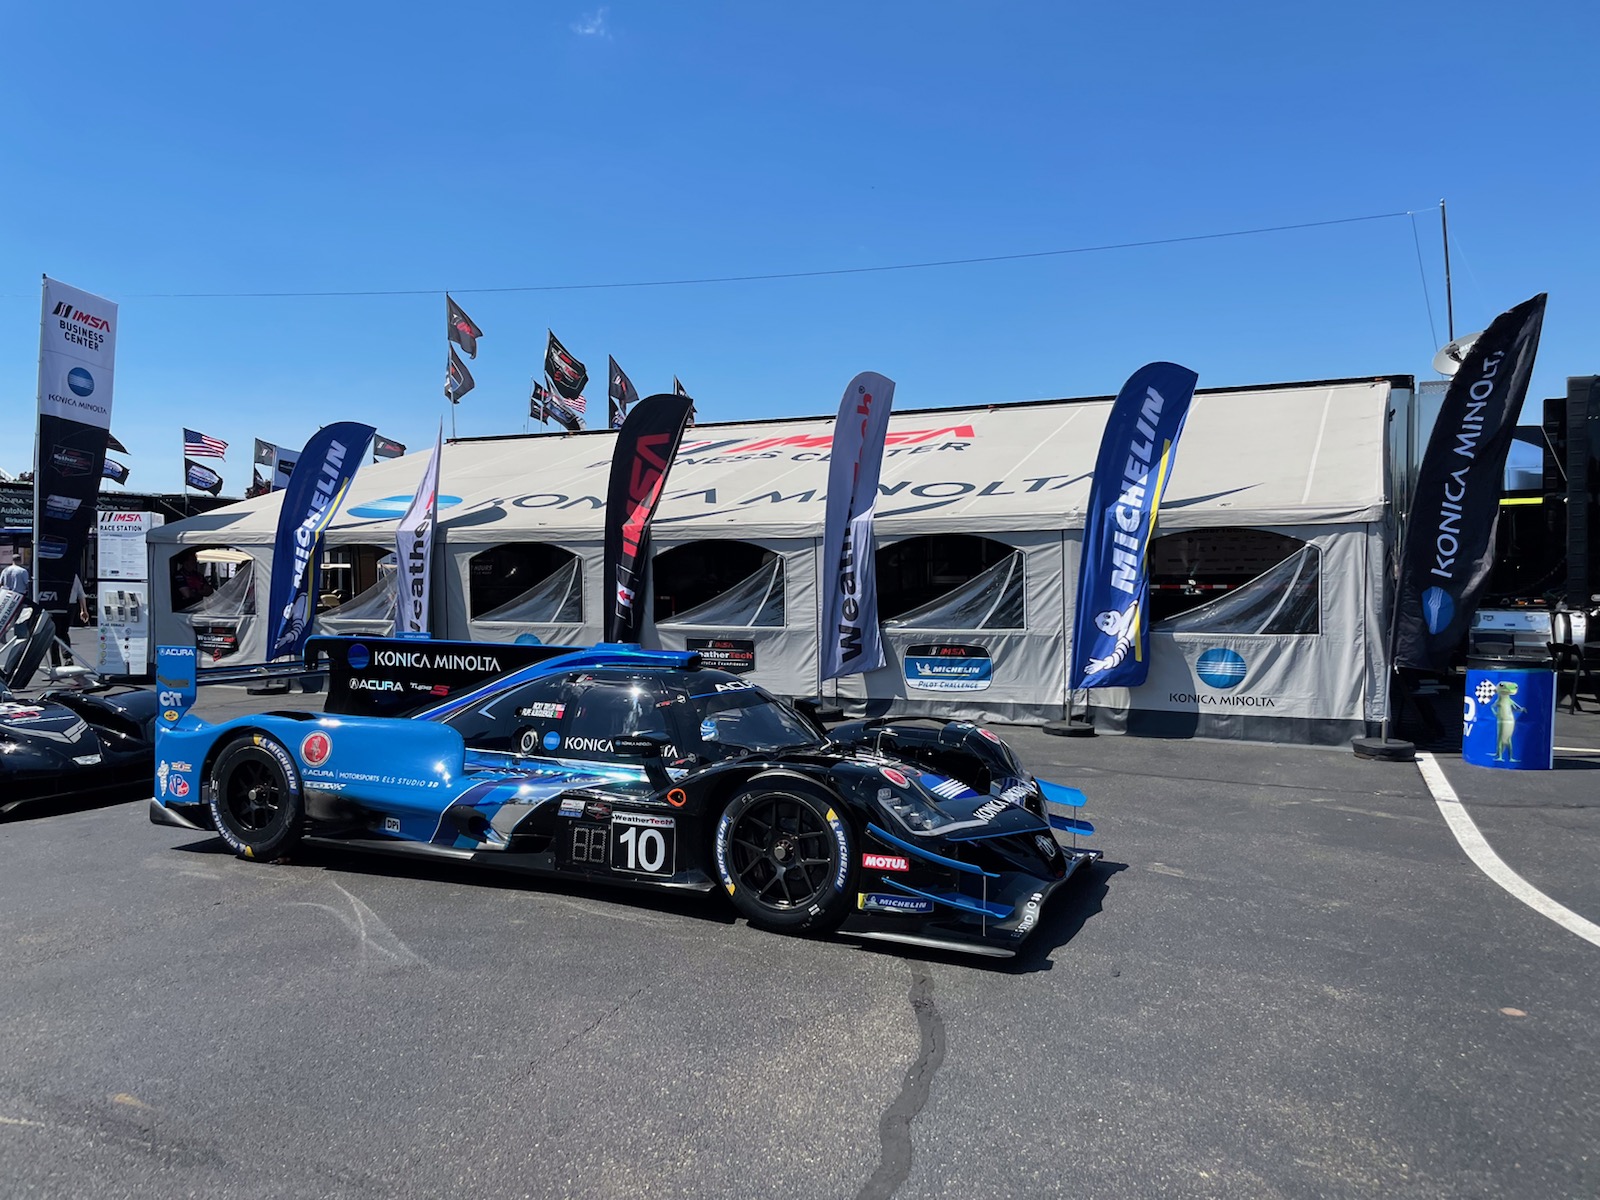 Konica Minolta Business Center Continues to Serve as the Hub of Business in the IMSA Paddock